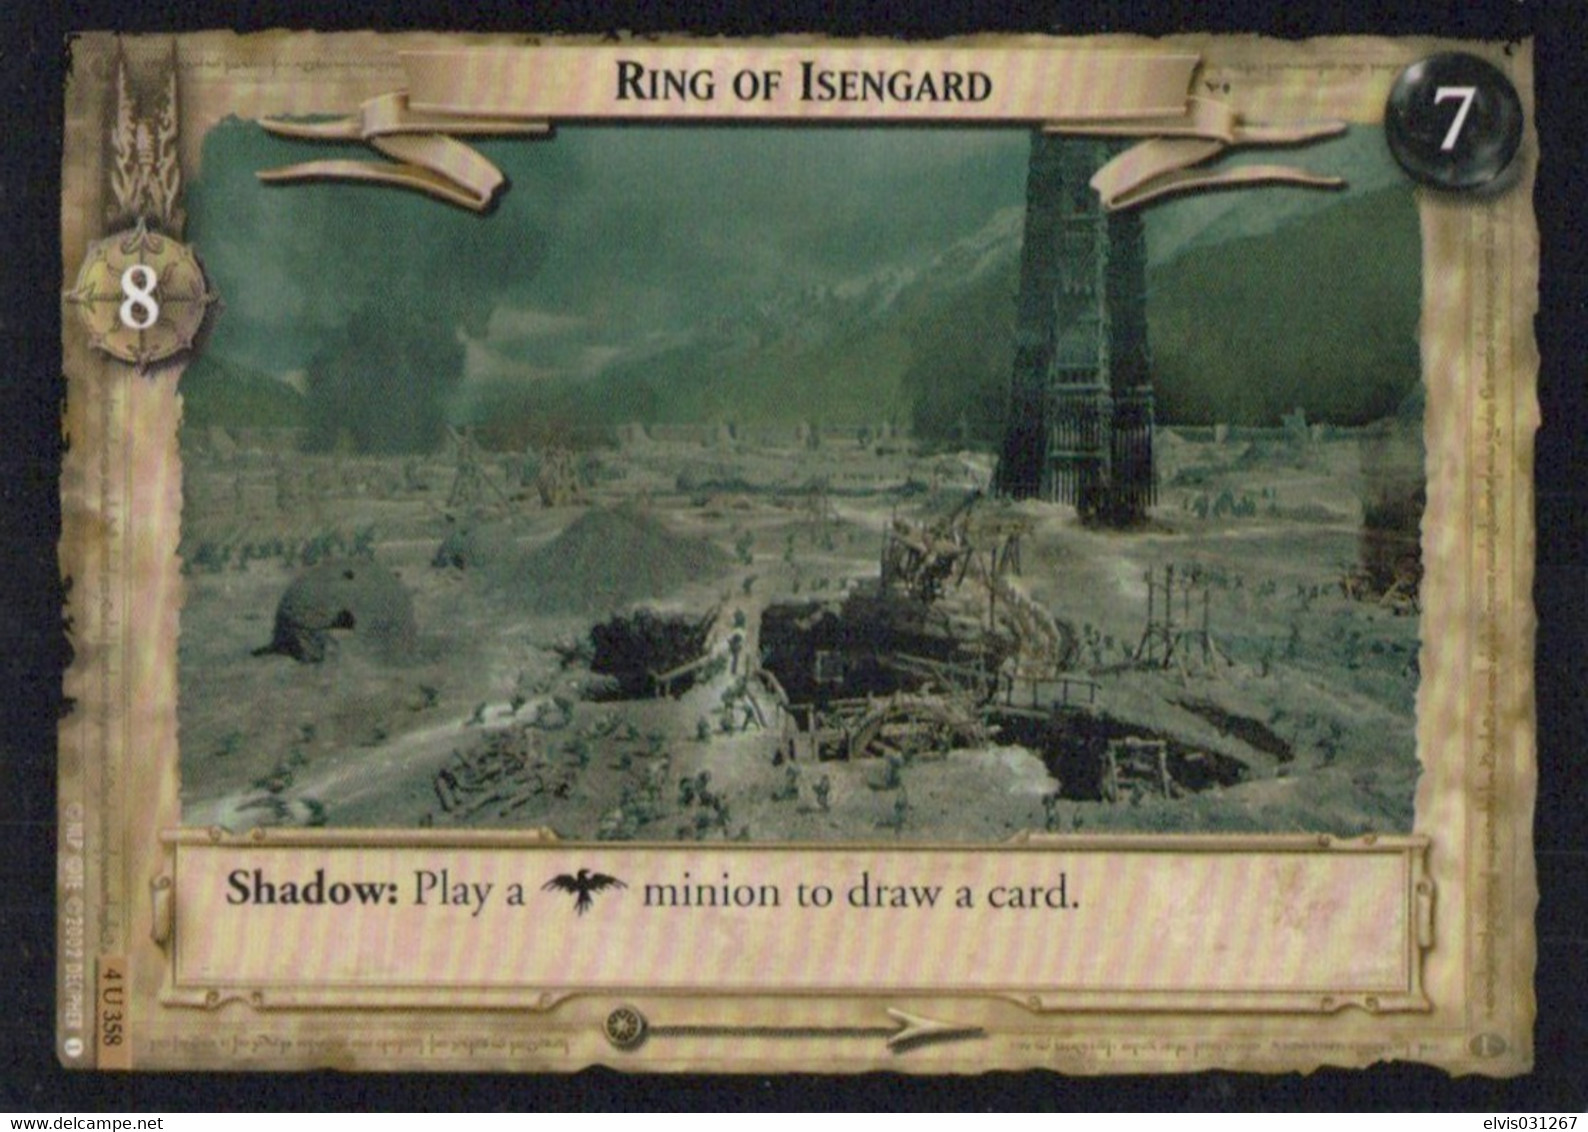 Vintage The Lord Of The Rings: #3-6 Valley Of Silverlode - EN - 2001-2004 - Mint Condition - Trading Card Game - Herr Der Ringe